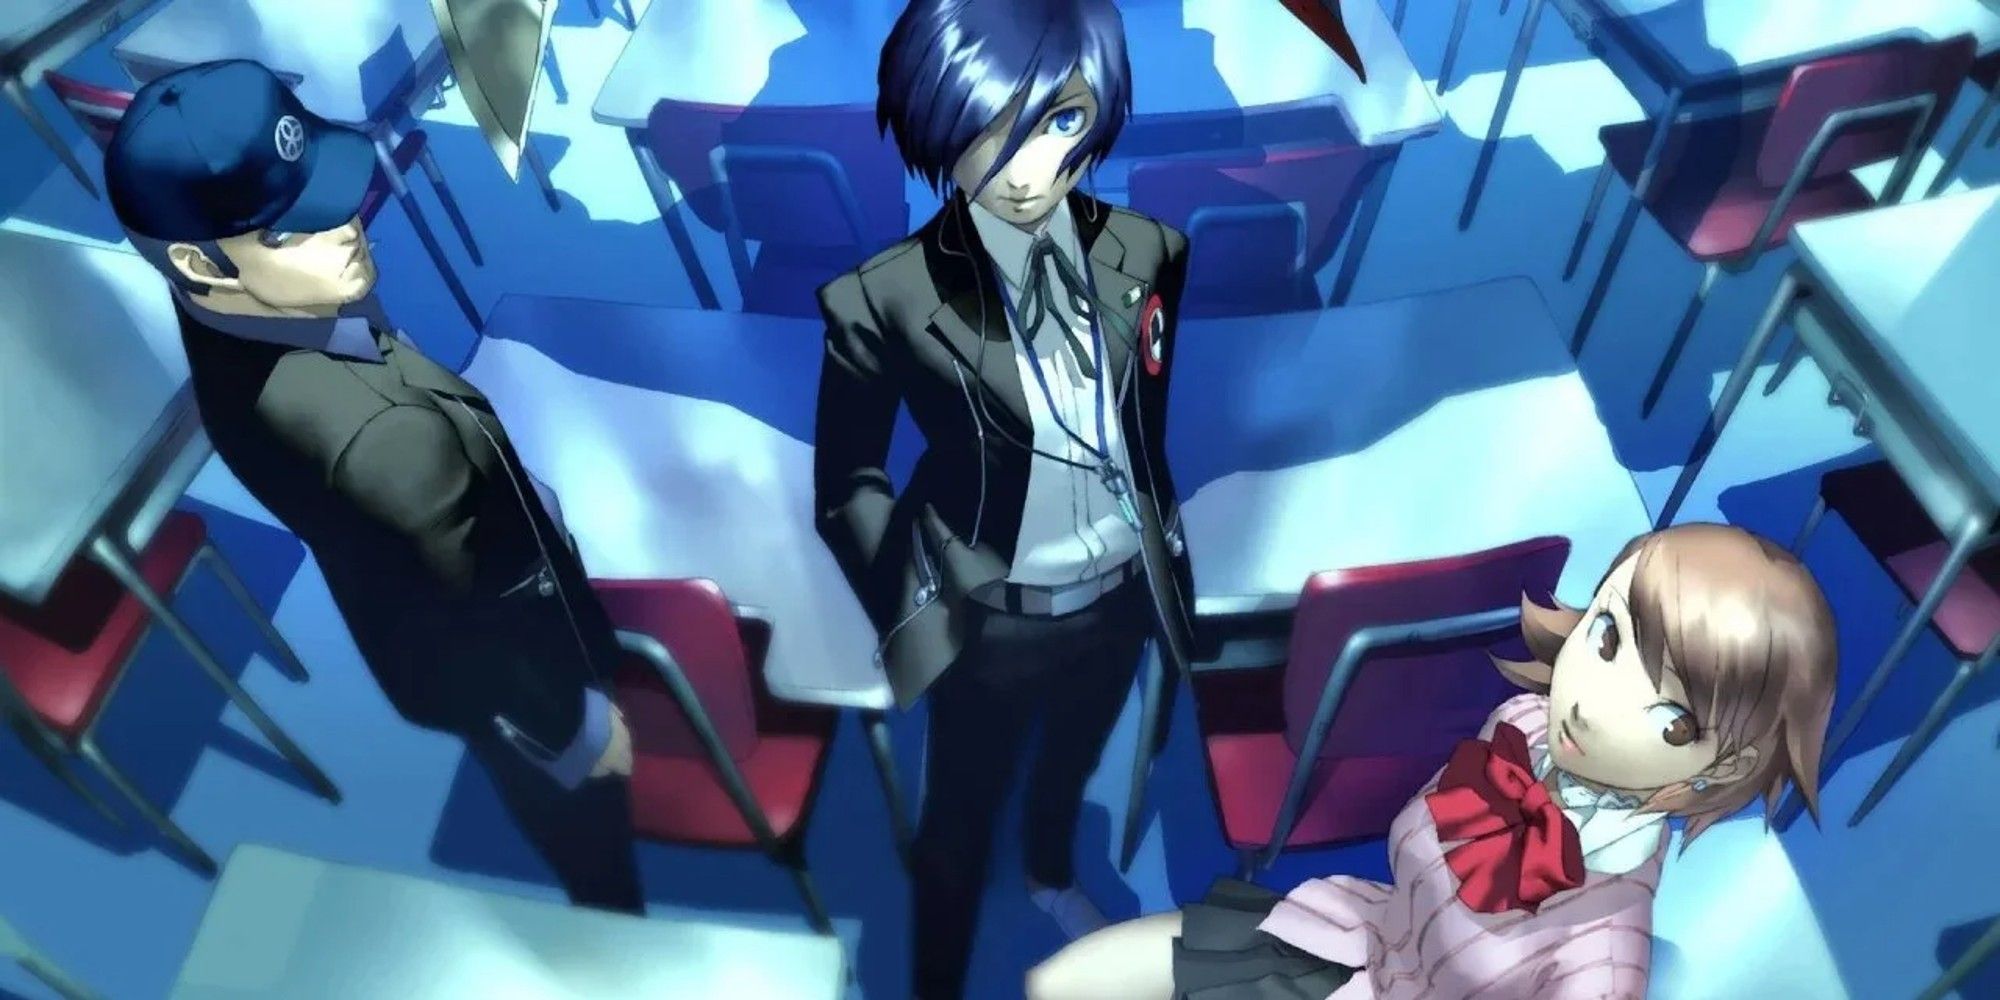 Protagonist standing in between Junpei left and Yukari Right in a classroom